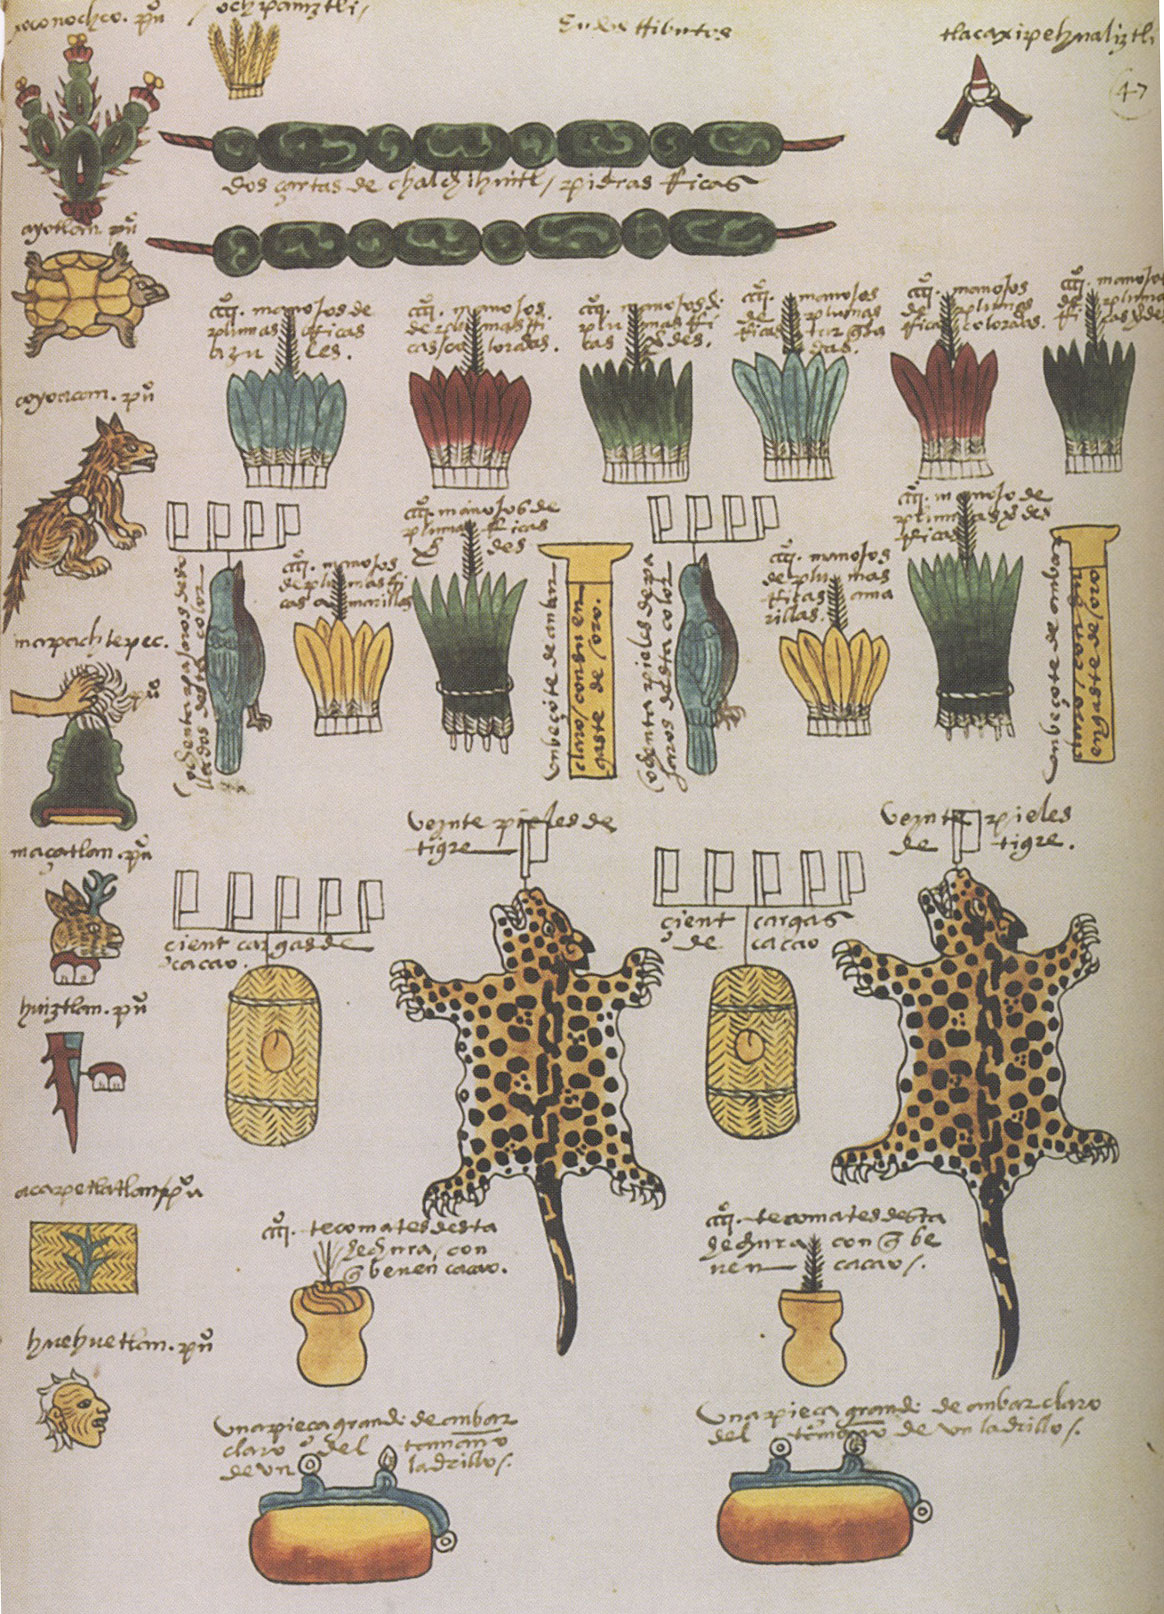 A European copy of an Aztec tribute list, whcih contains chocolate as a key tributary "gift."